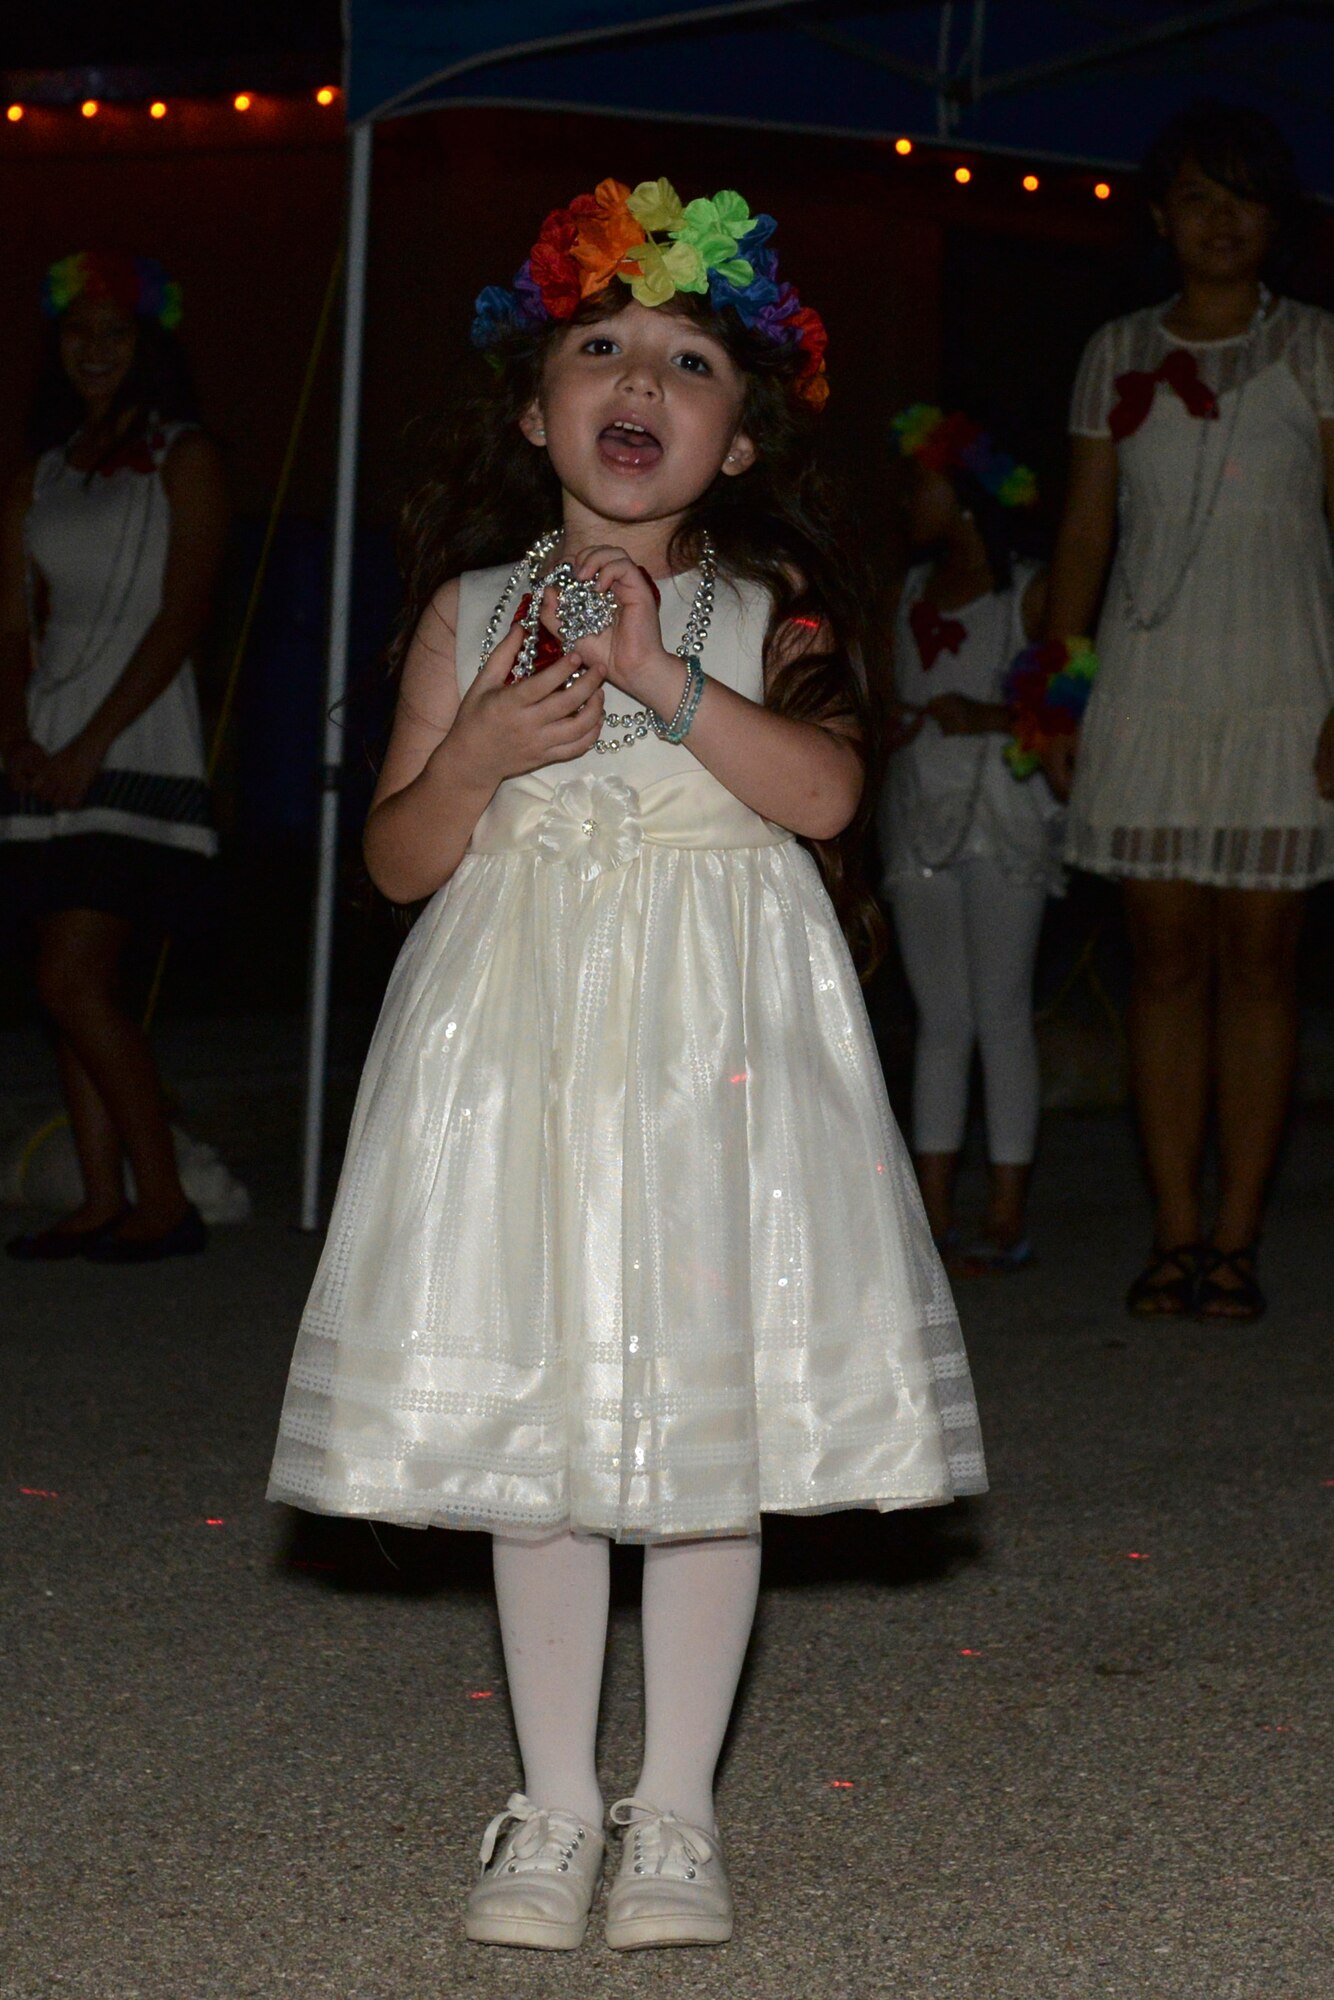 A young girl sings a solo Dec. 12, 2015, during the annual Rota Walk at Andersen Air Force Base, Guam. Rota Walk is an annual family event that showcases Andersen’s holiday spirit. (U.S. Air Force photo/Airman 1st Class Jacob Skovo)